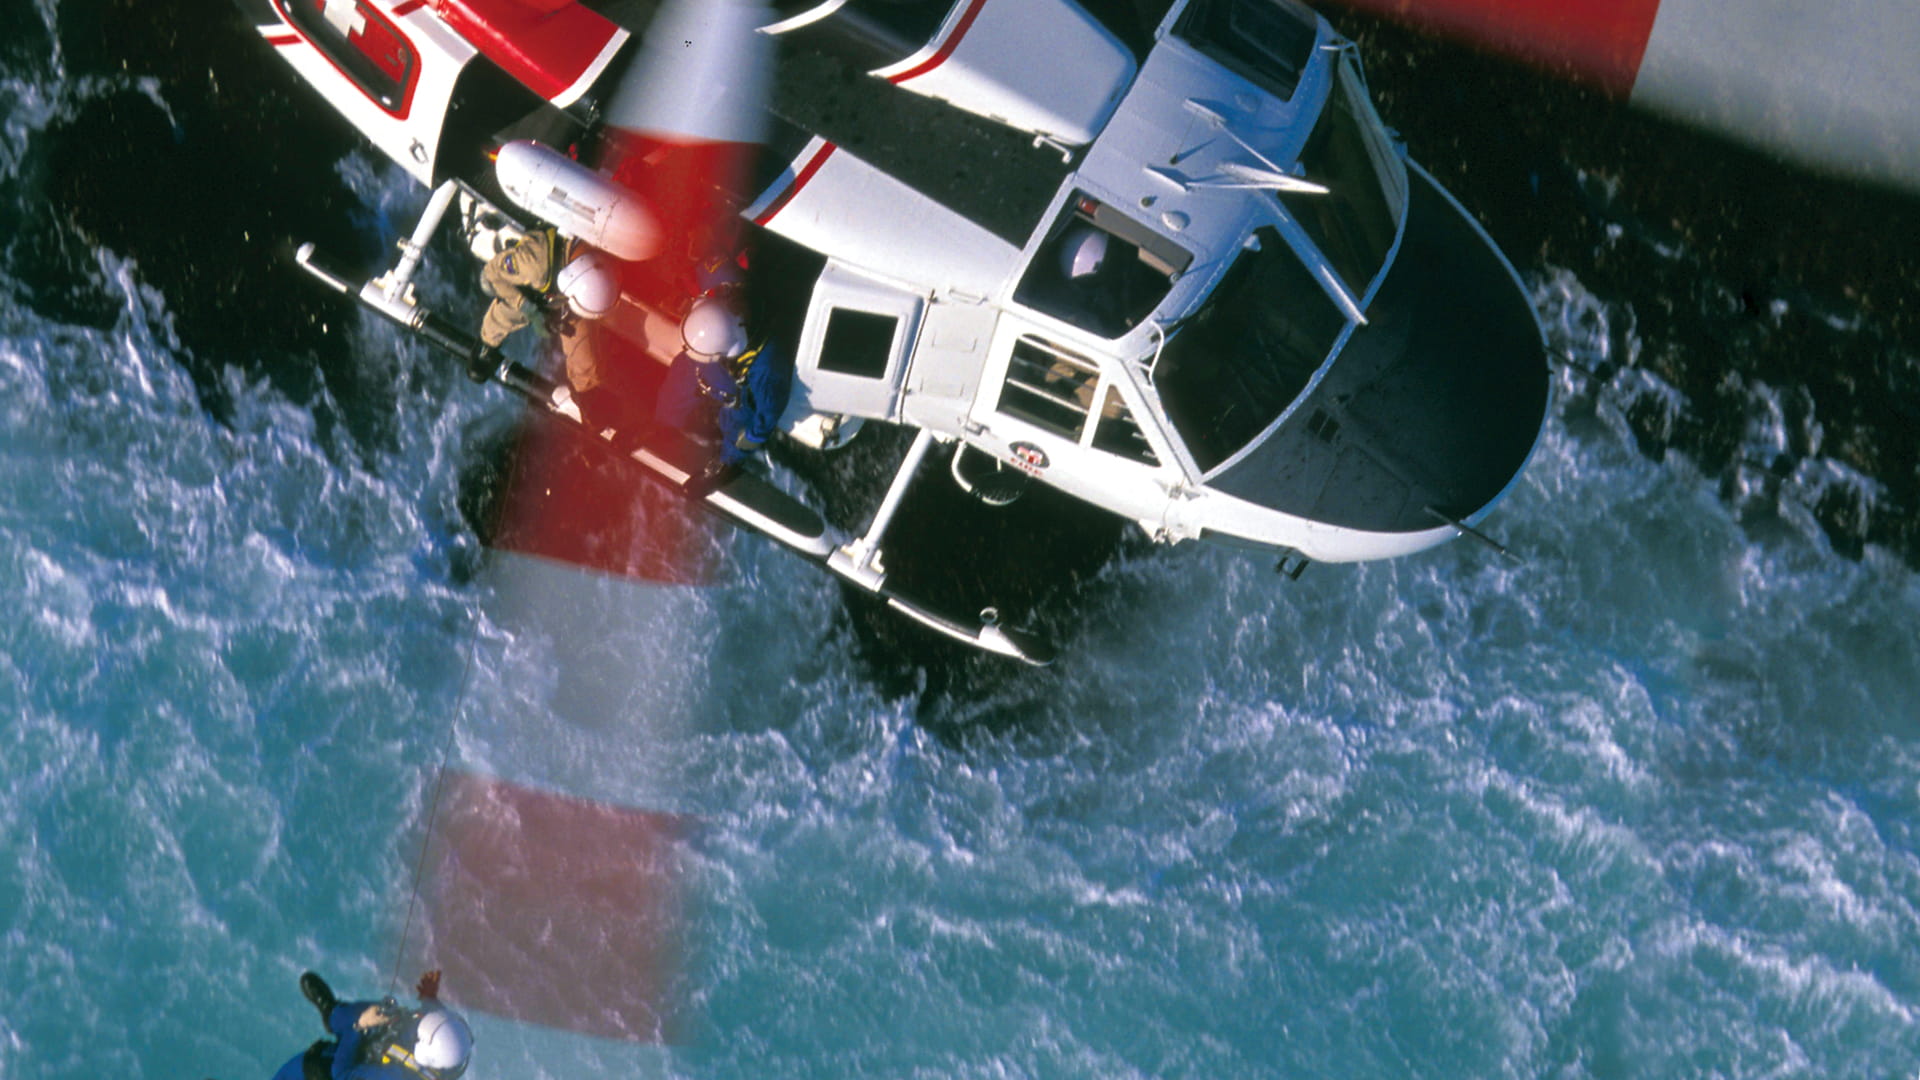 an overview shot of a helicopter rescuing a person from the ocean